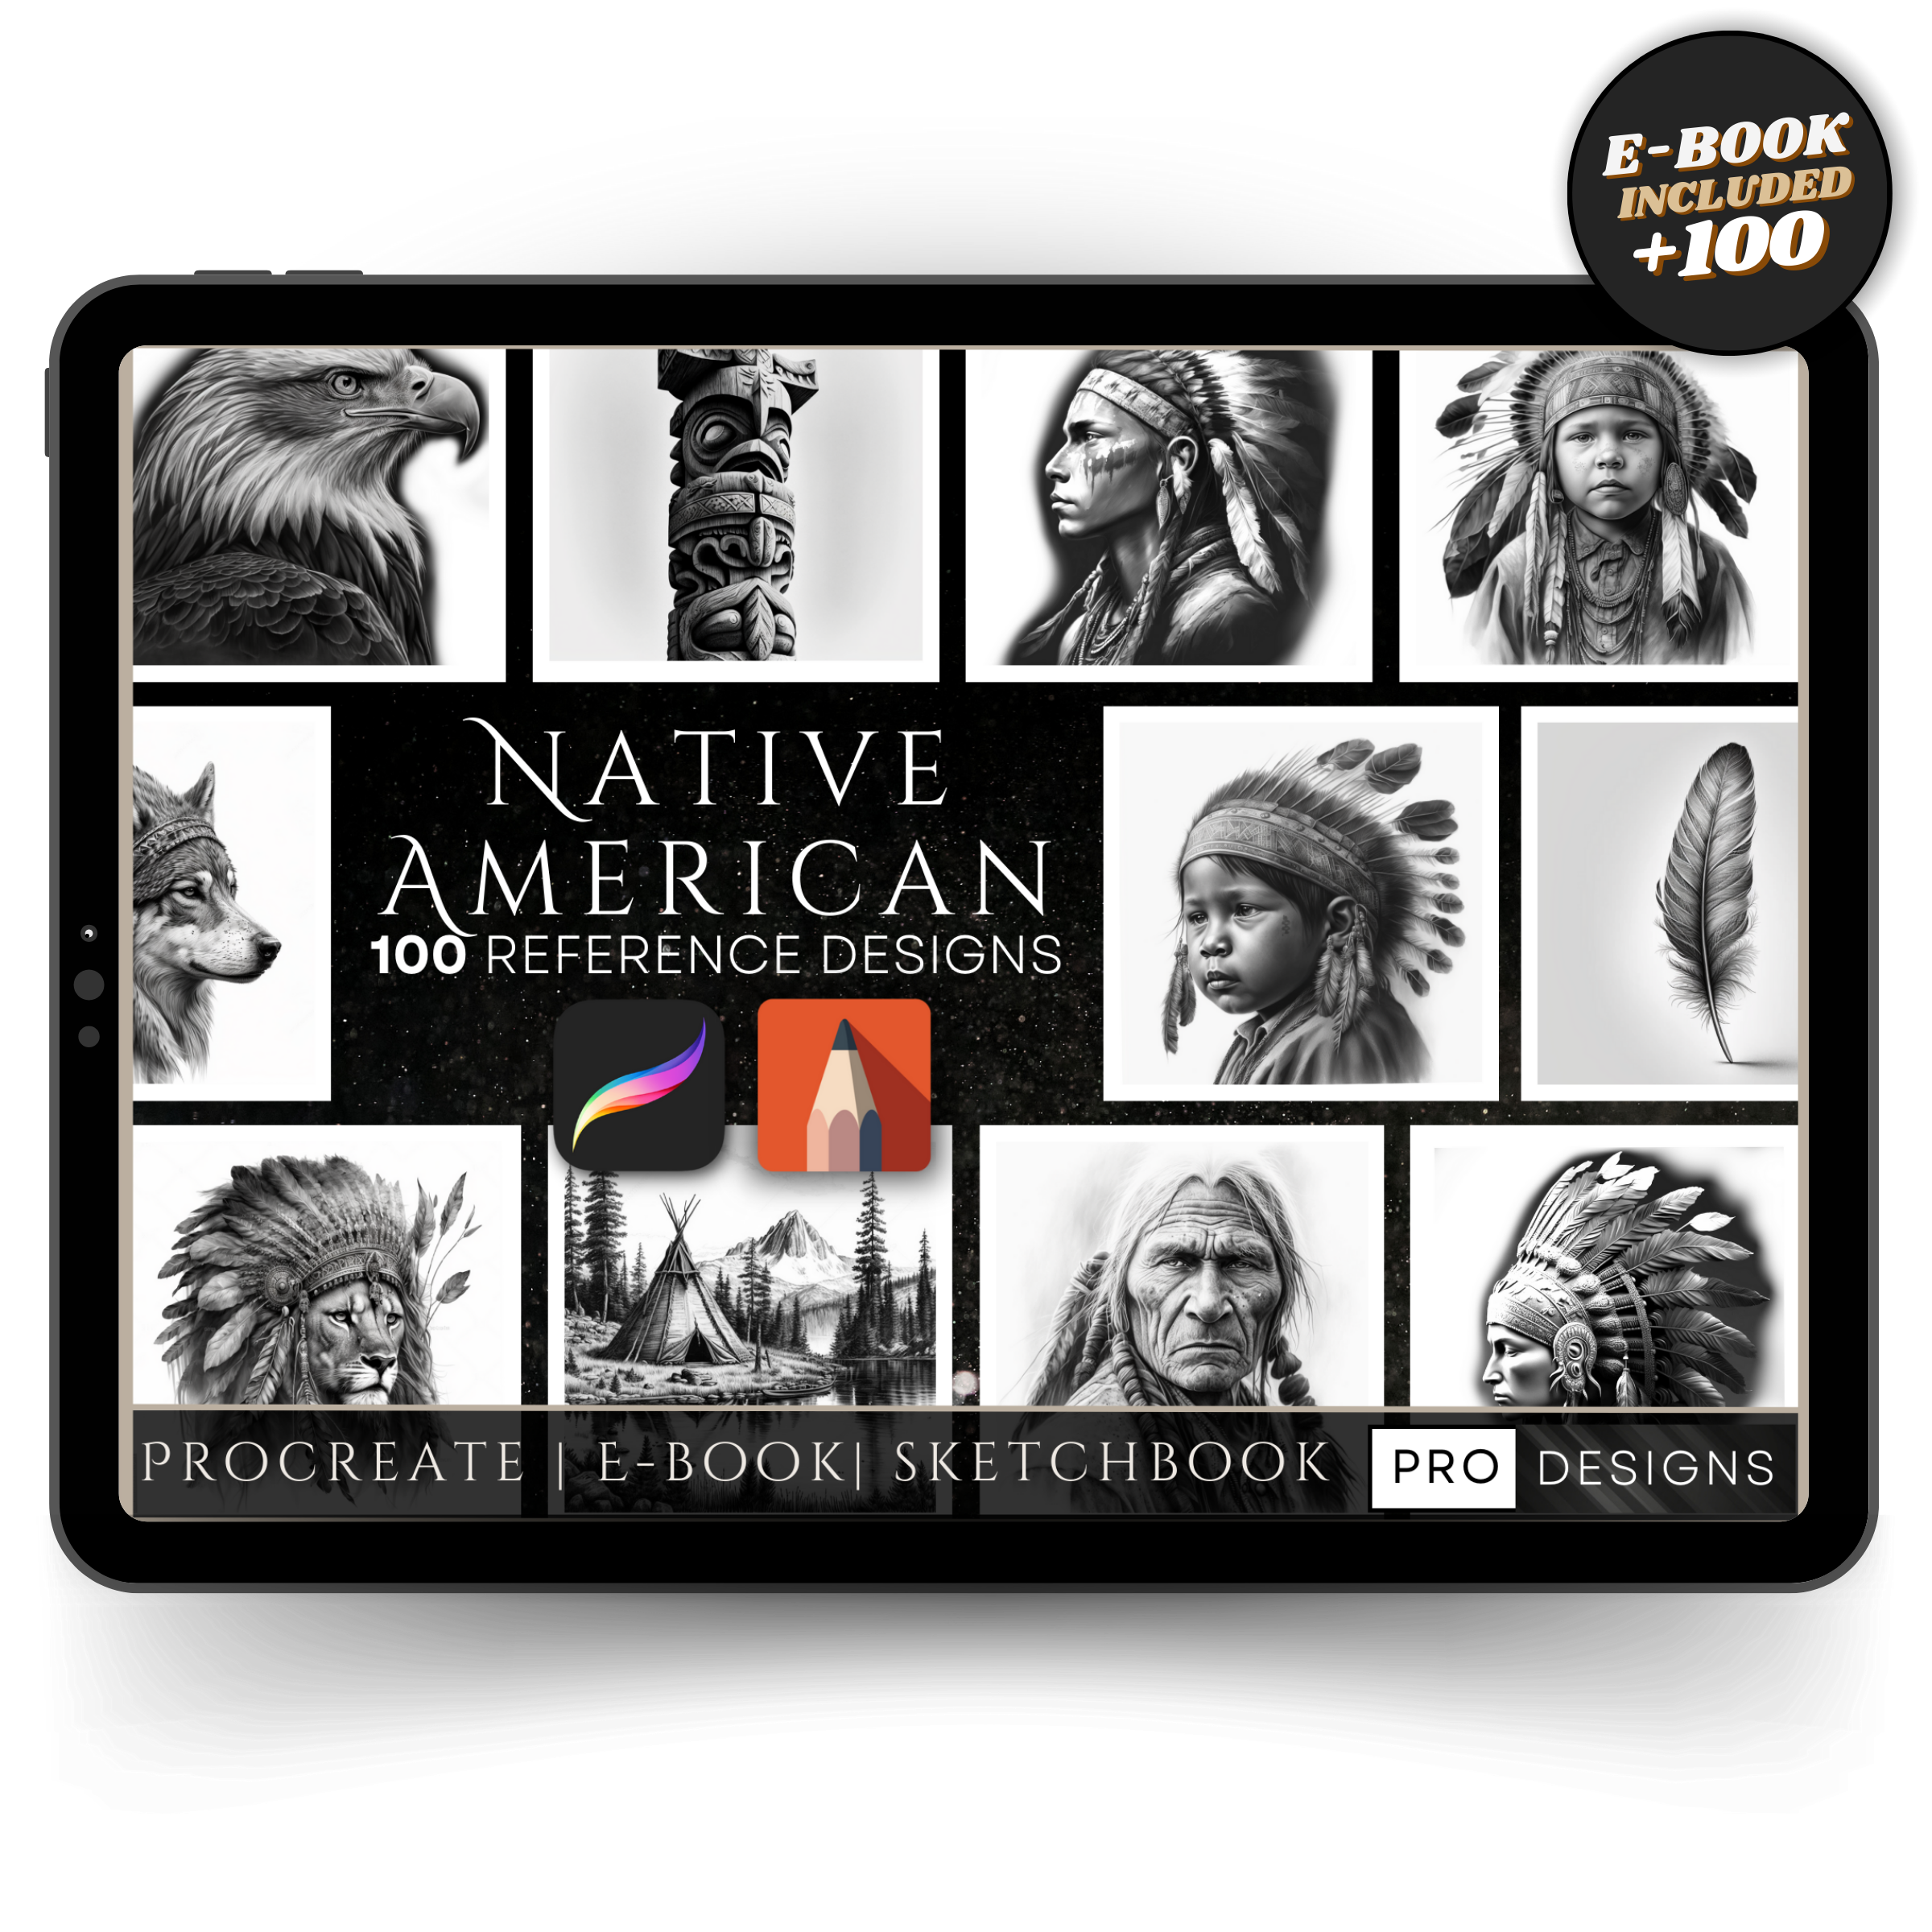 "Spirit of the Ancestors" - The Native American Collection